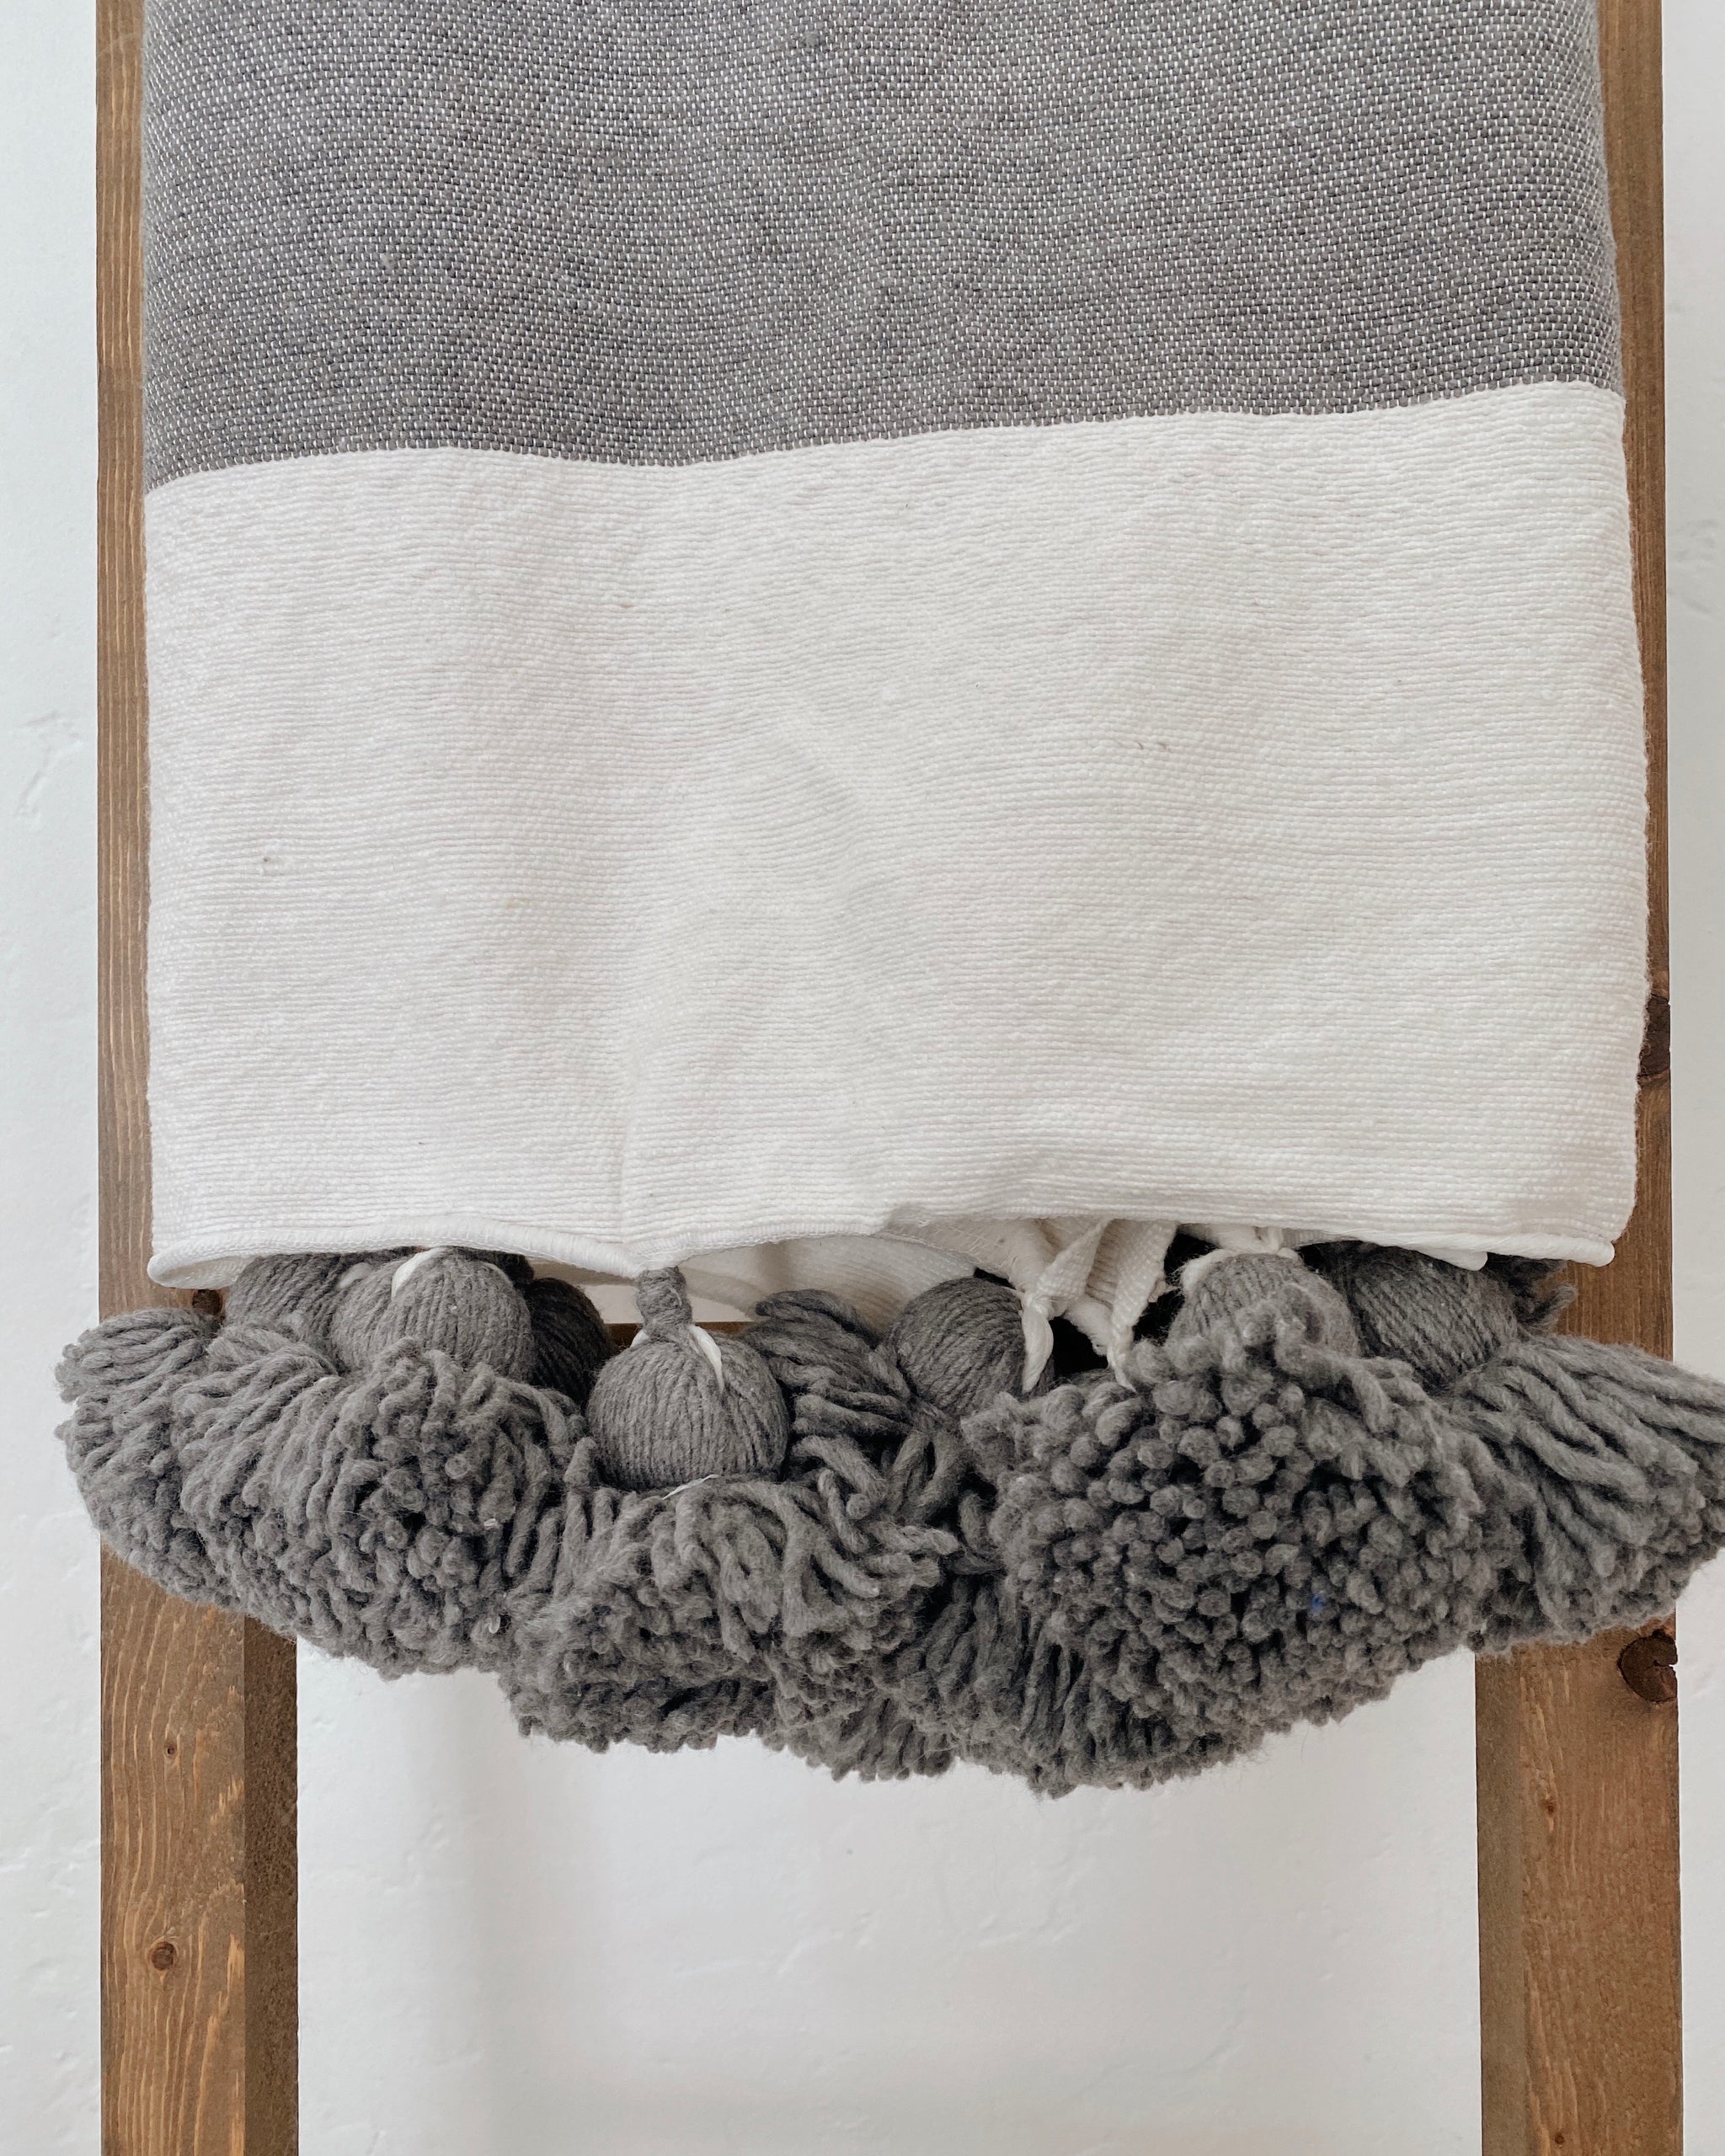 Rustic Canyon Blanket, Grey and White Moroccan Blanket, 100% Cotton, Handmade in Morocco